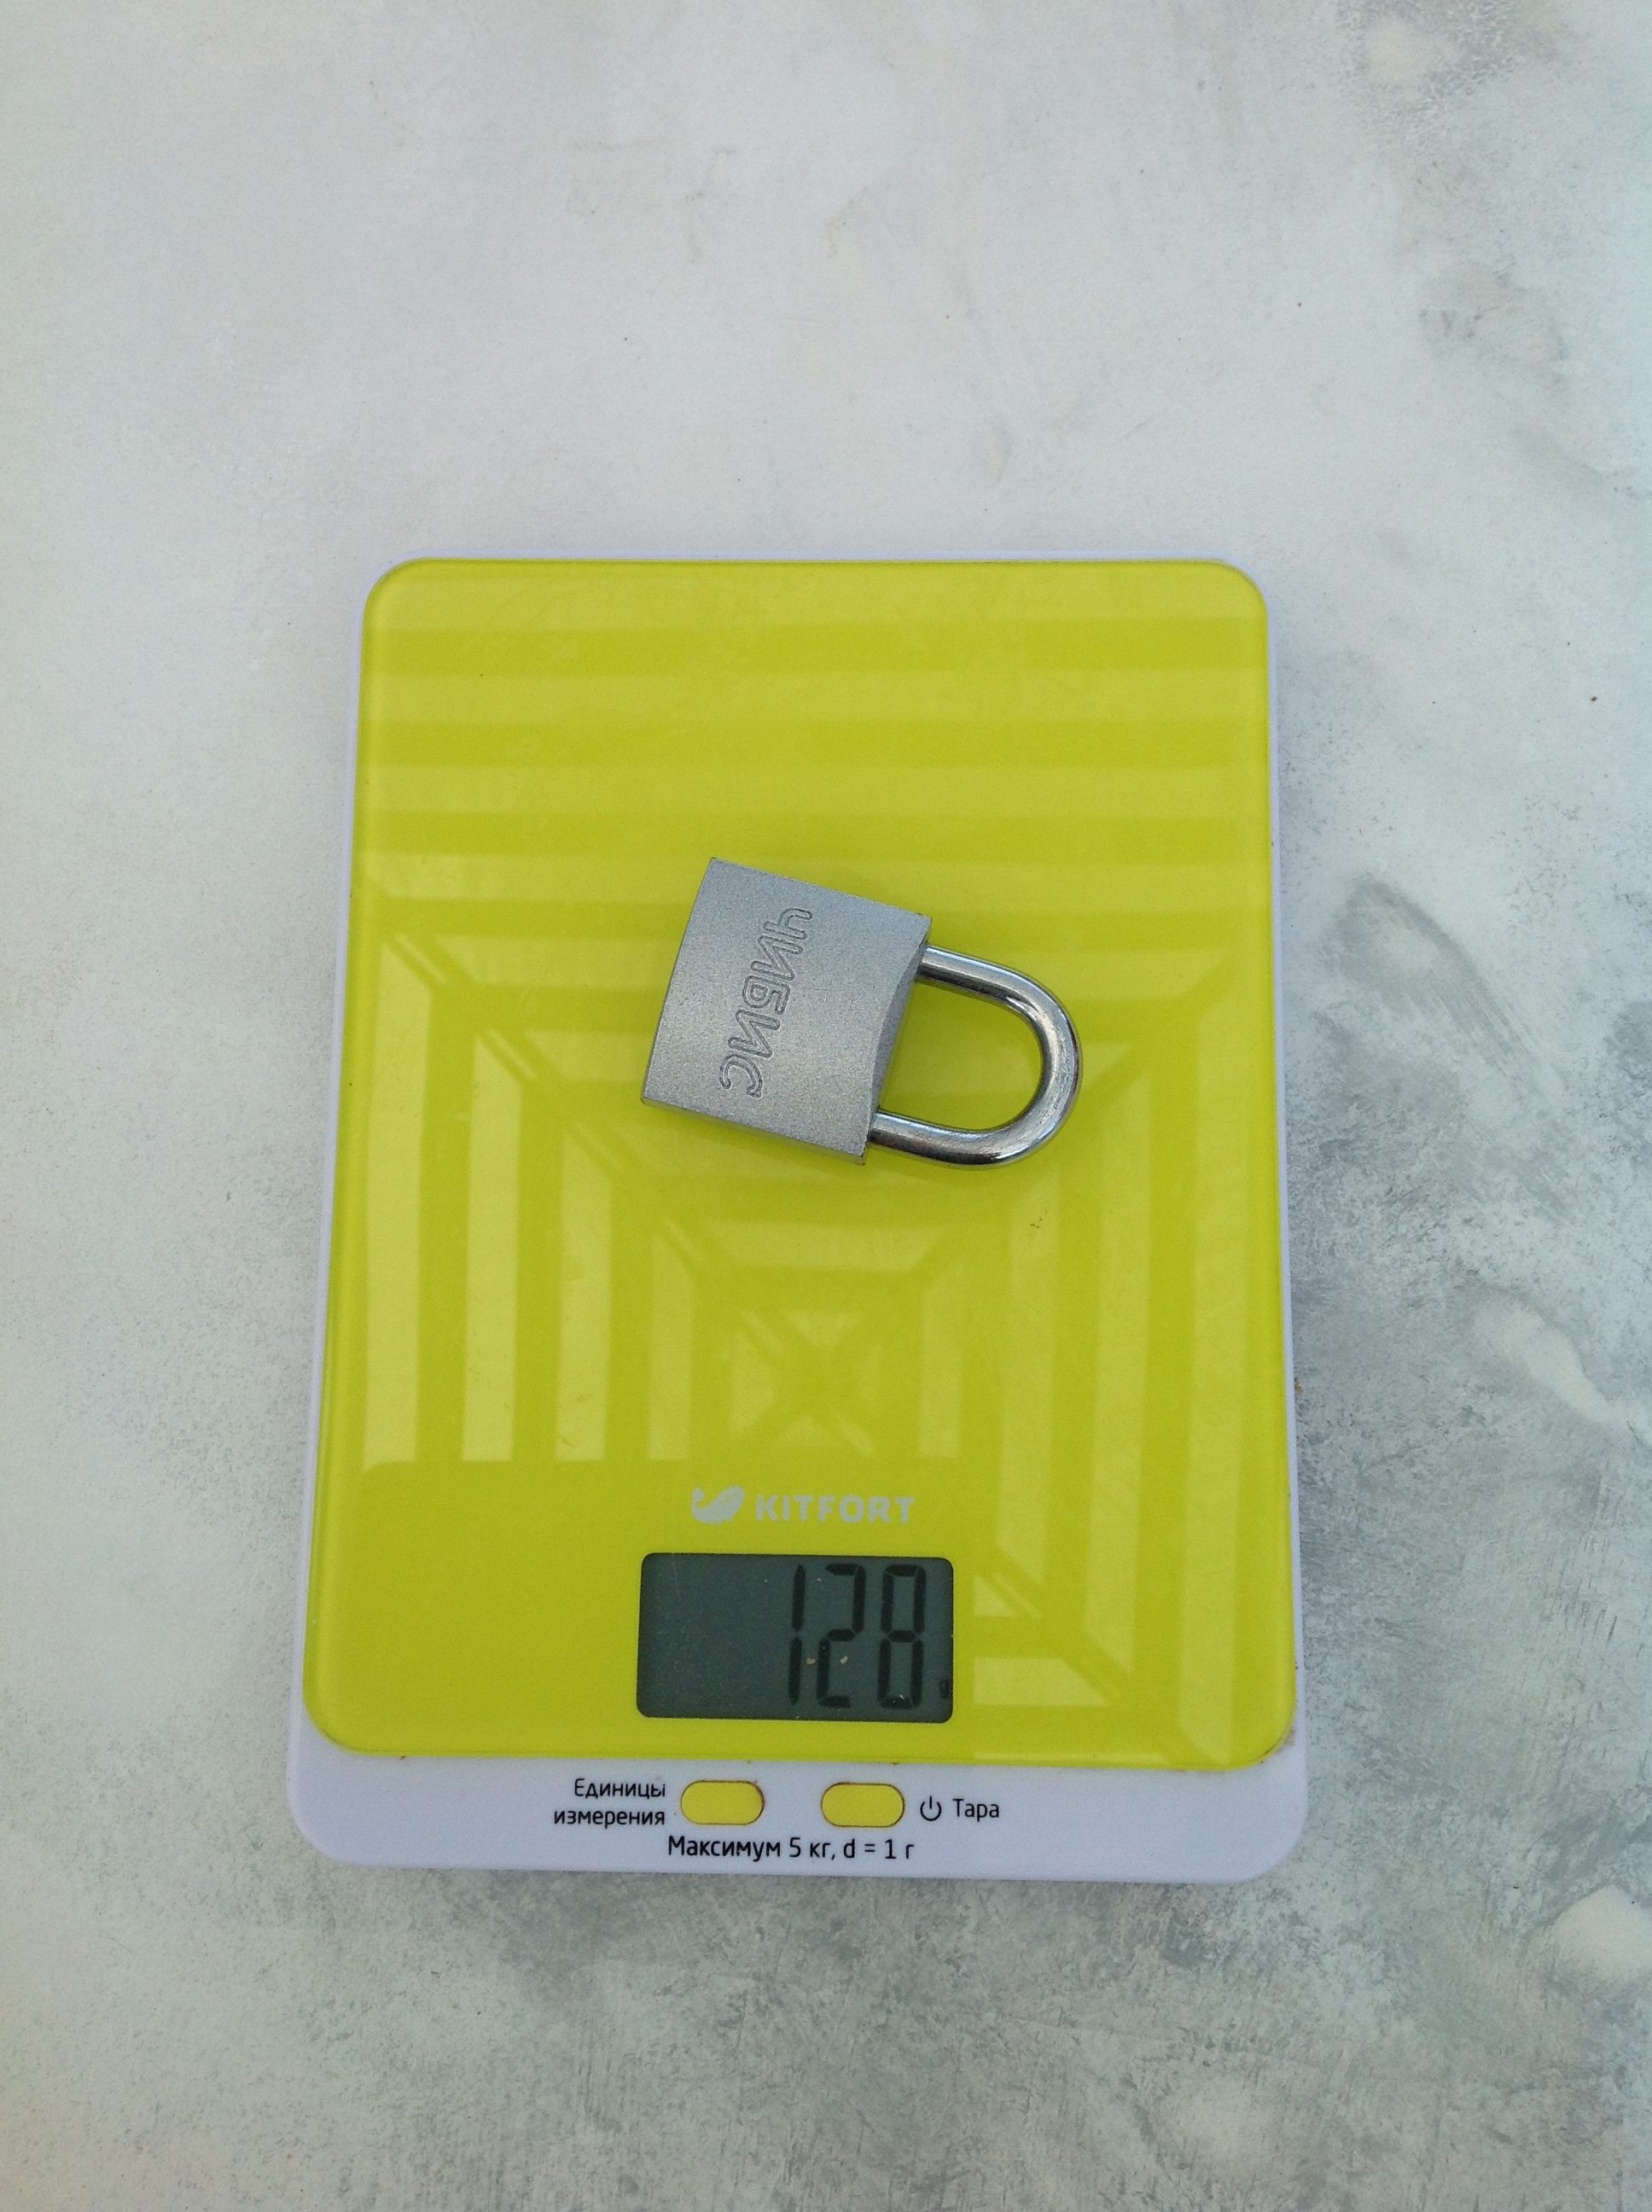 How much does a small padlock weigh?